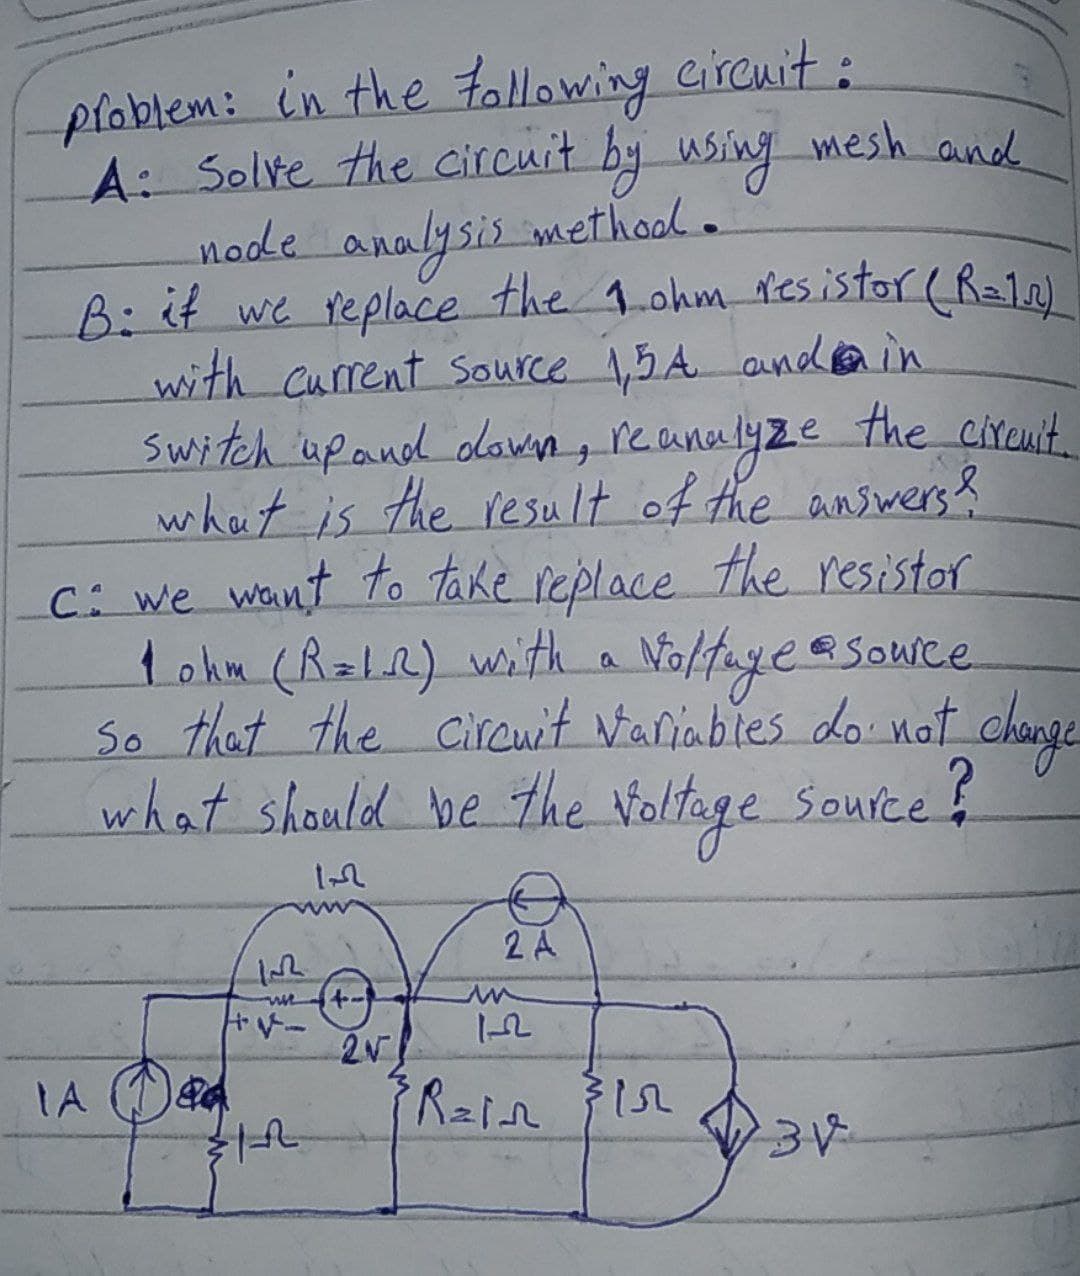 ploblem: in the tollowing circnit:
A: Solve the circuit by using mesh and
node analysis methood.
B:it we replace the 1.ohm resistor (Ra12)
with Current Source 1,5A andain
Switch upand dawn, reanalyze the cireuit.
what is the result of the answers?
C: we want to Take replace the resistor
tokm (RaLR) with a Noltageasowce
So that the Circwit Vaniables do nat_change
what should be the Voltoge Soufce
eSouice
2 A
トー
